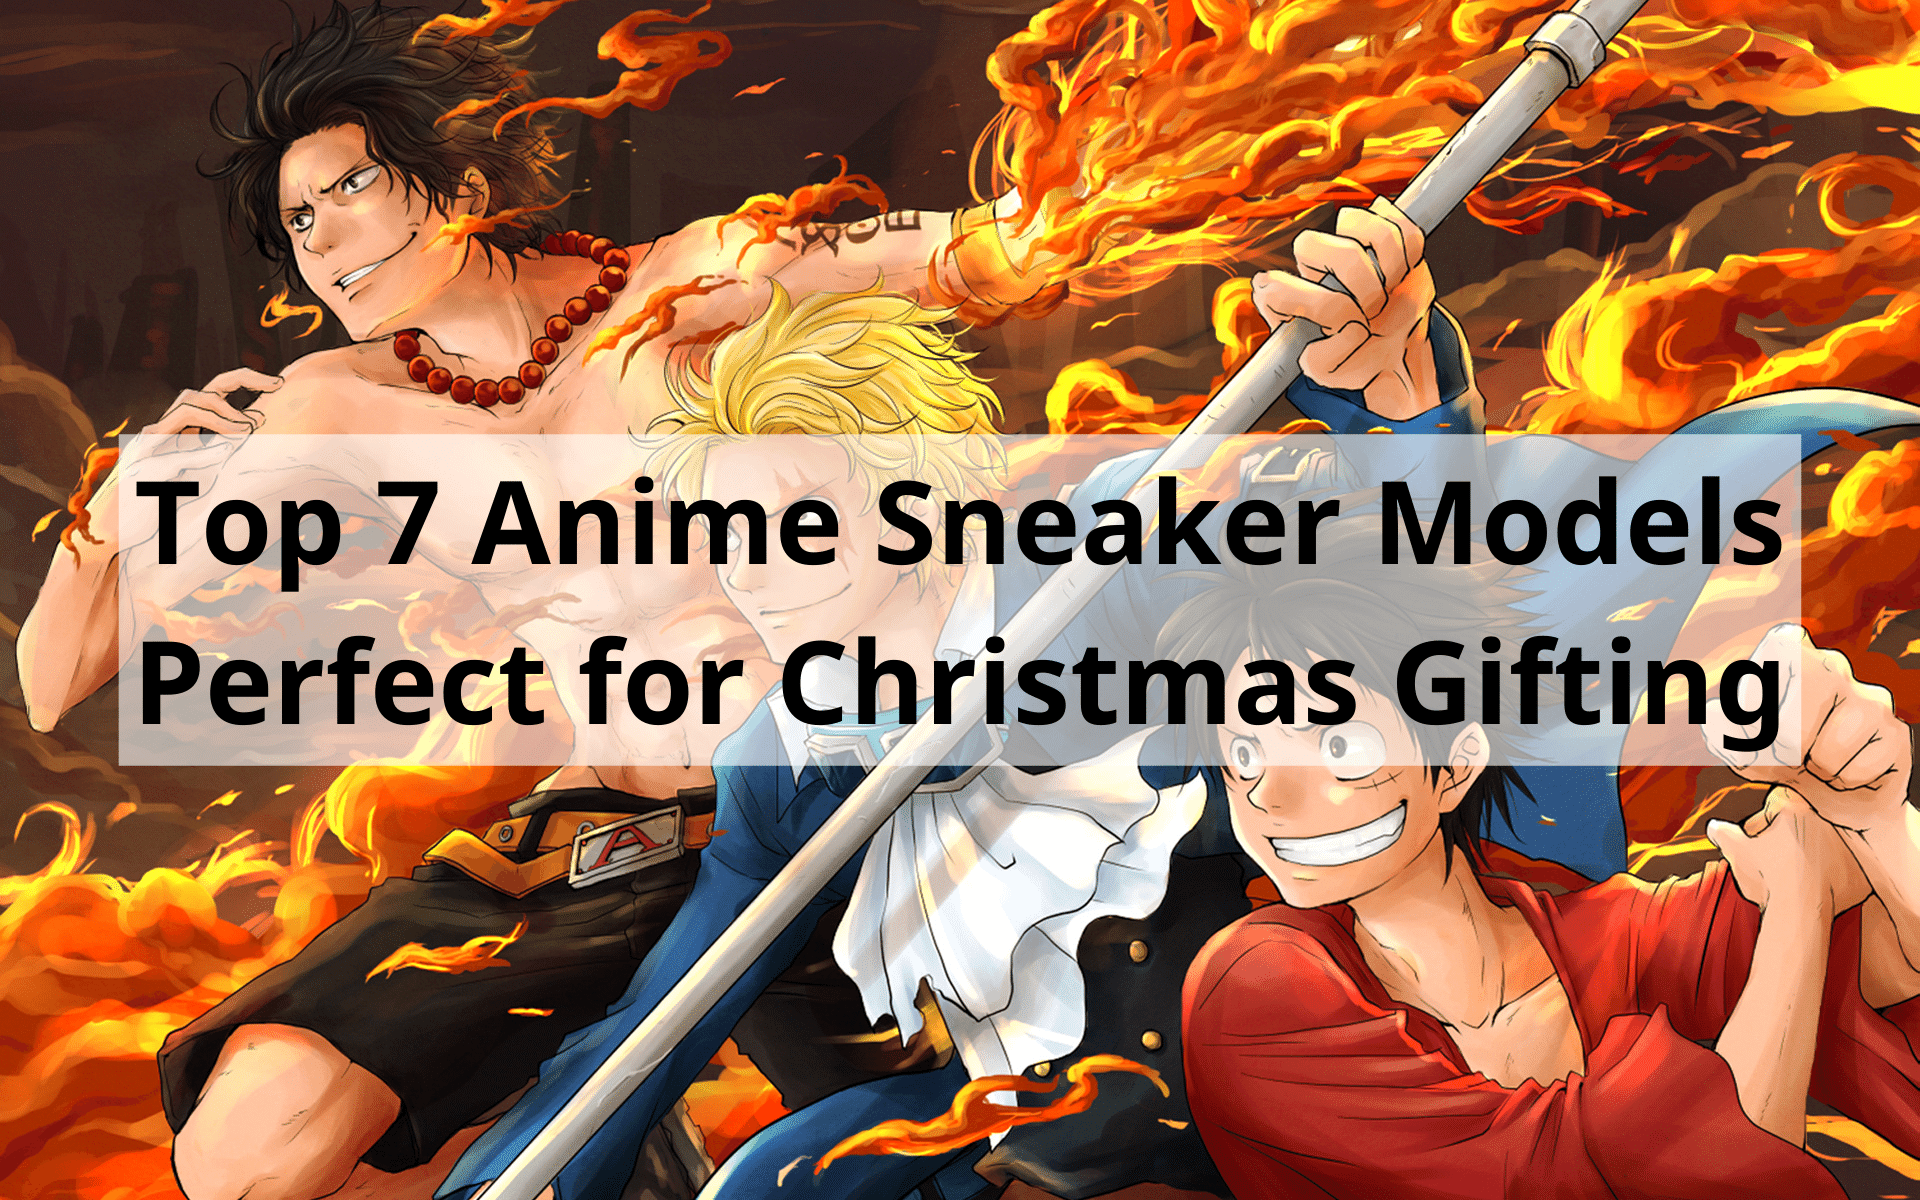 Top 7 Anime Sneaker Models Perfect for Christmas Gifting